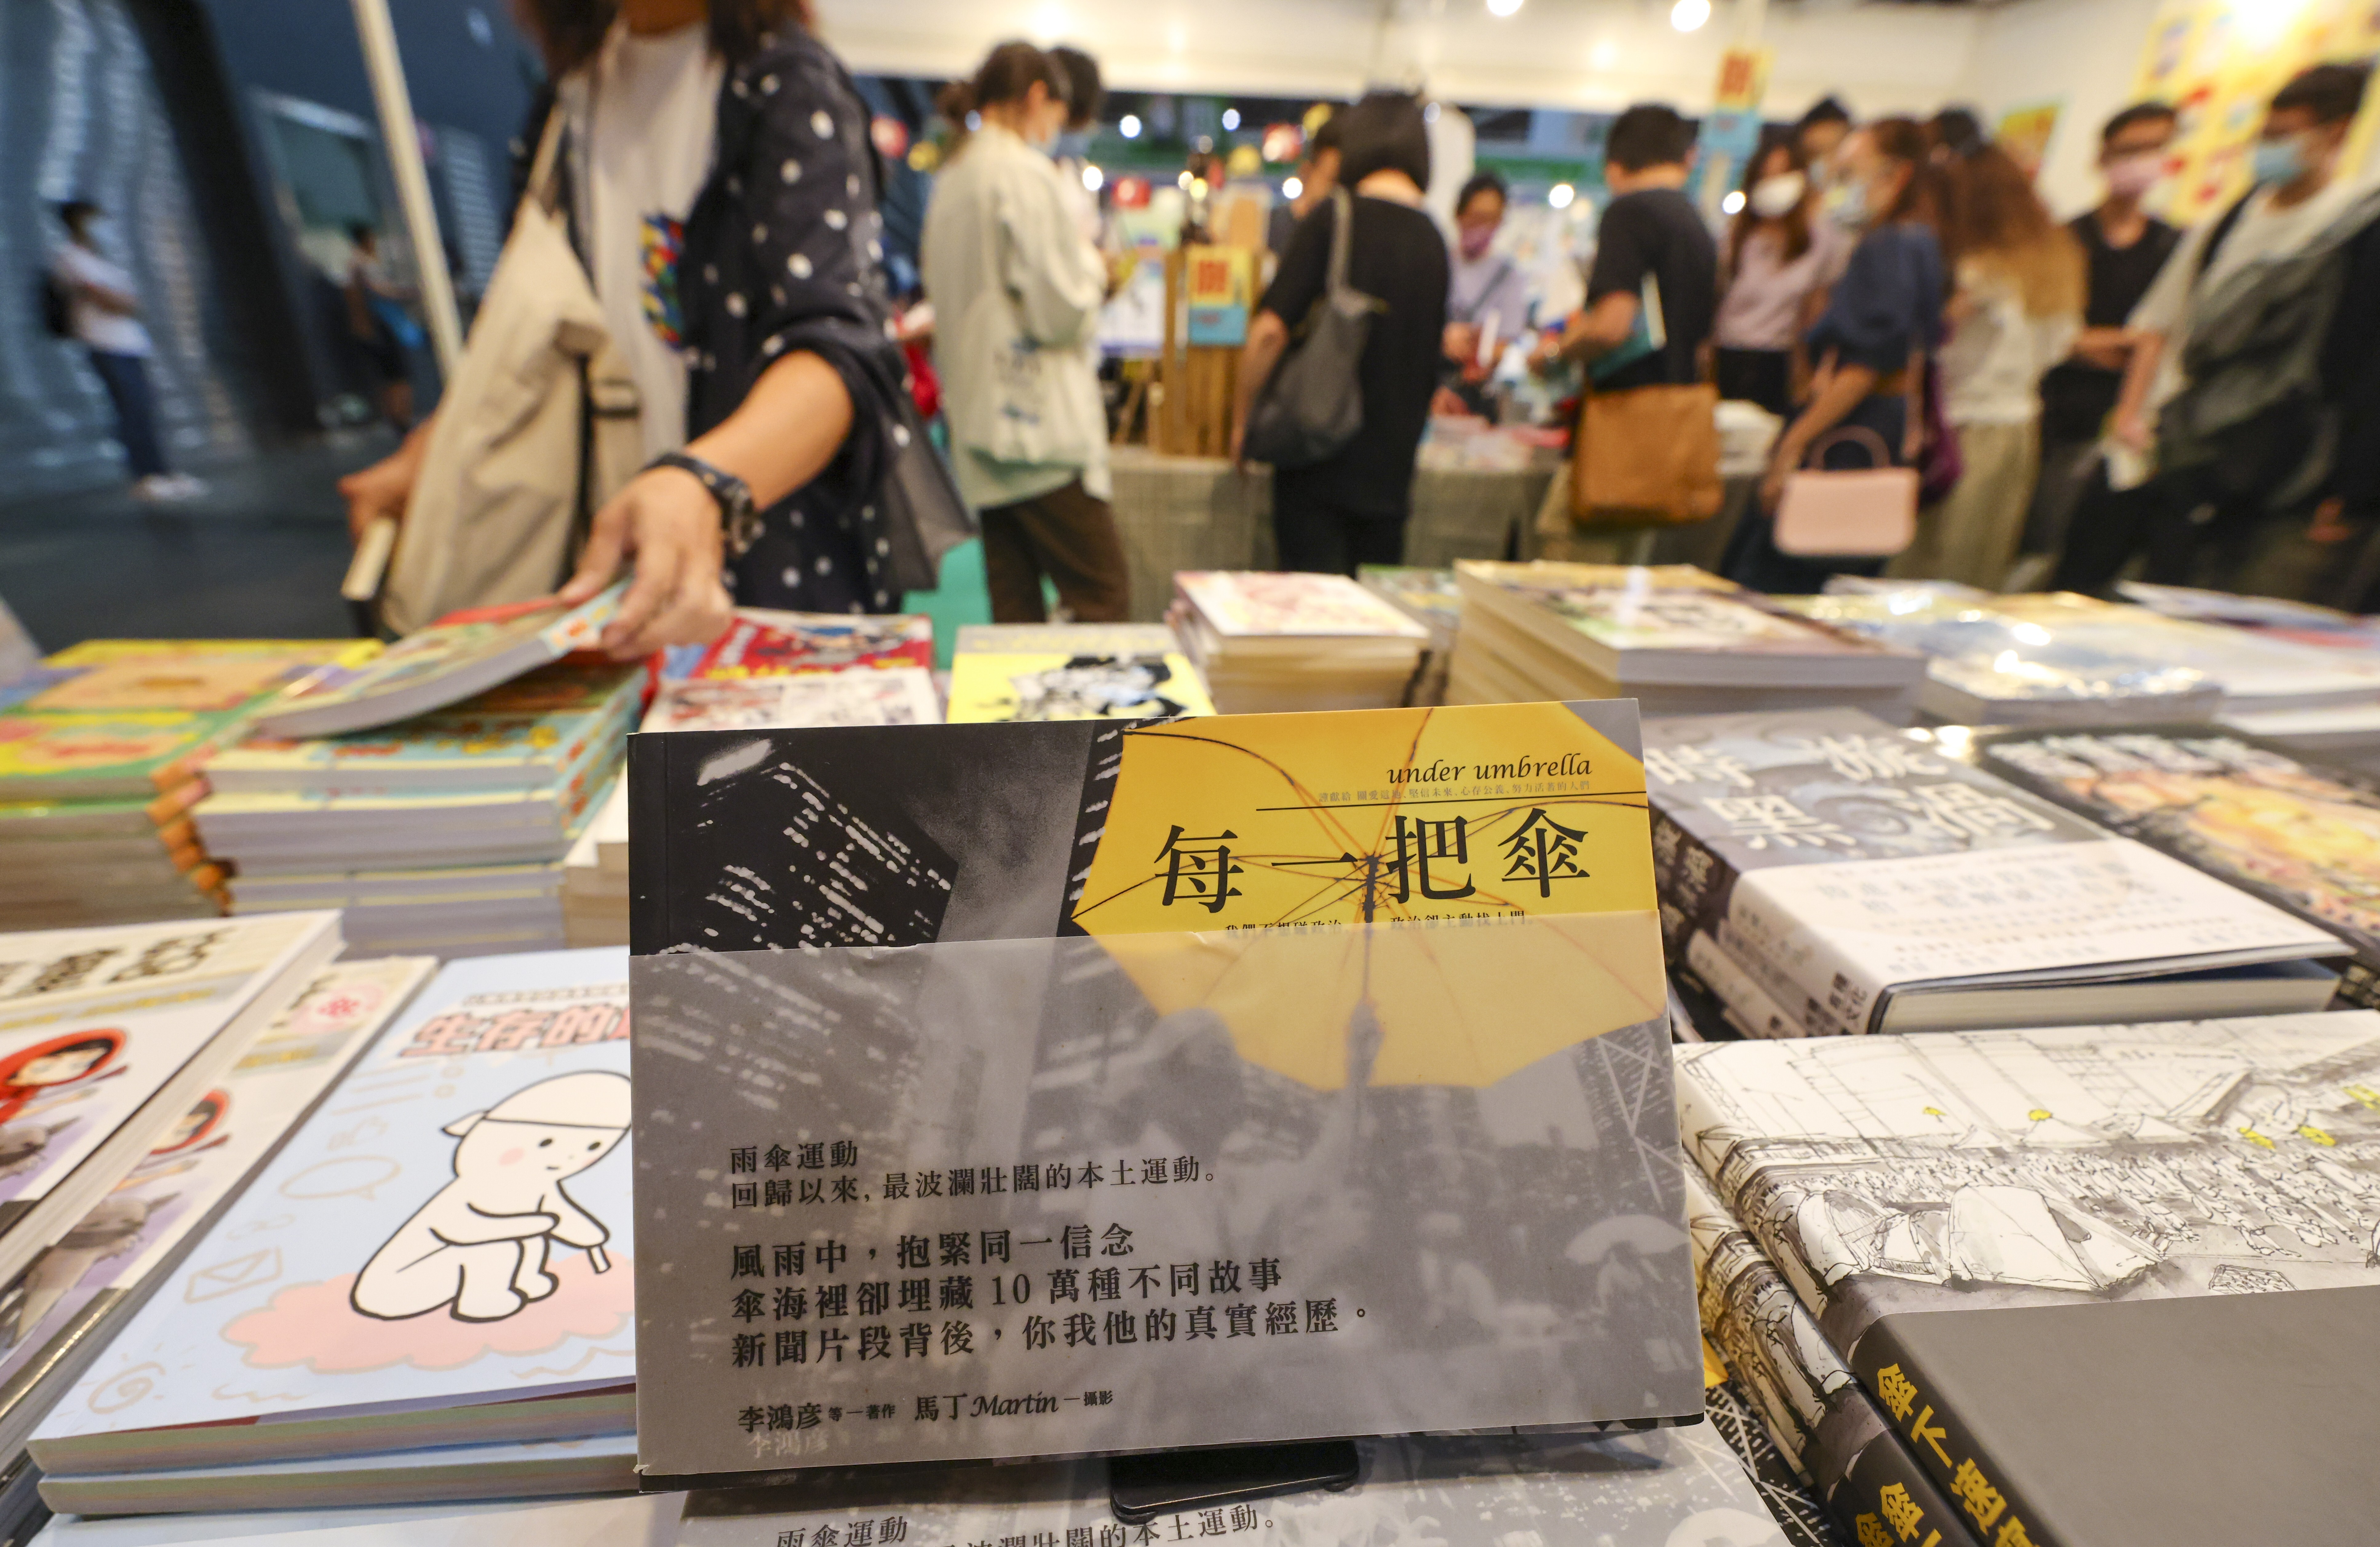 Under Umbrella is one of the books named in the complaints by activist group Politihk Social Strategic. Photo: Dickson Lee